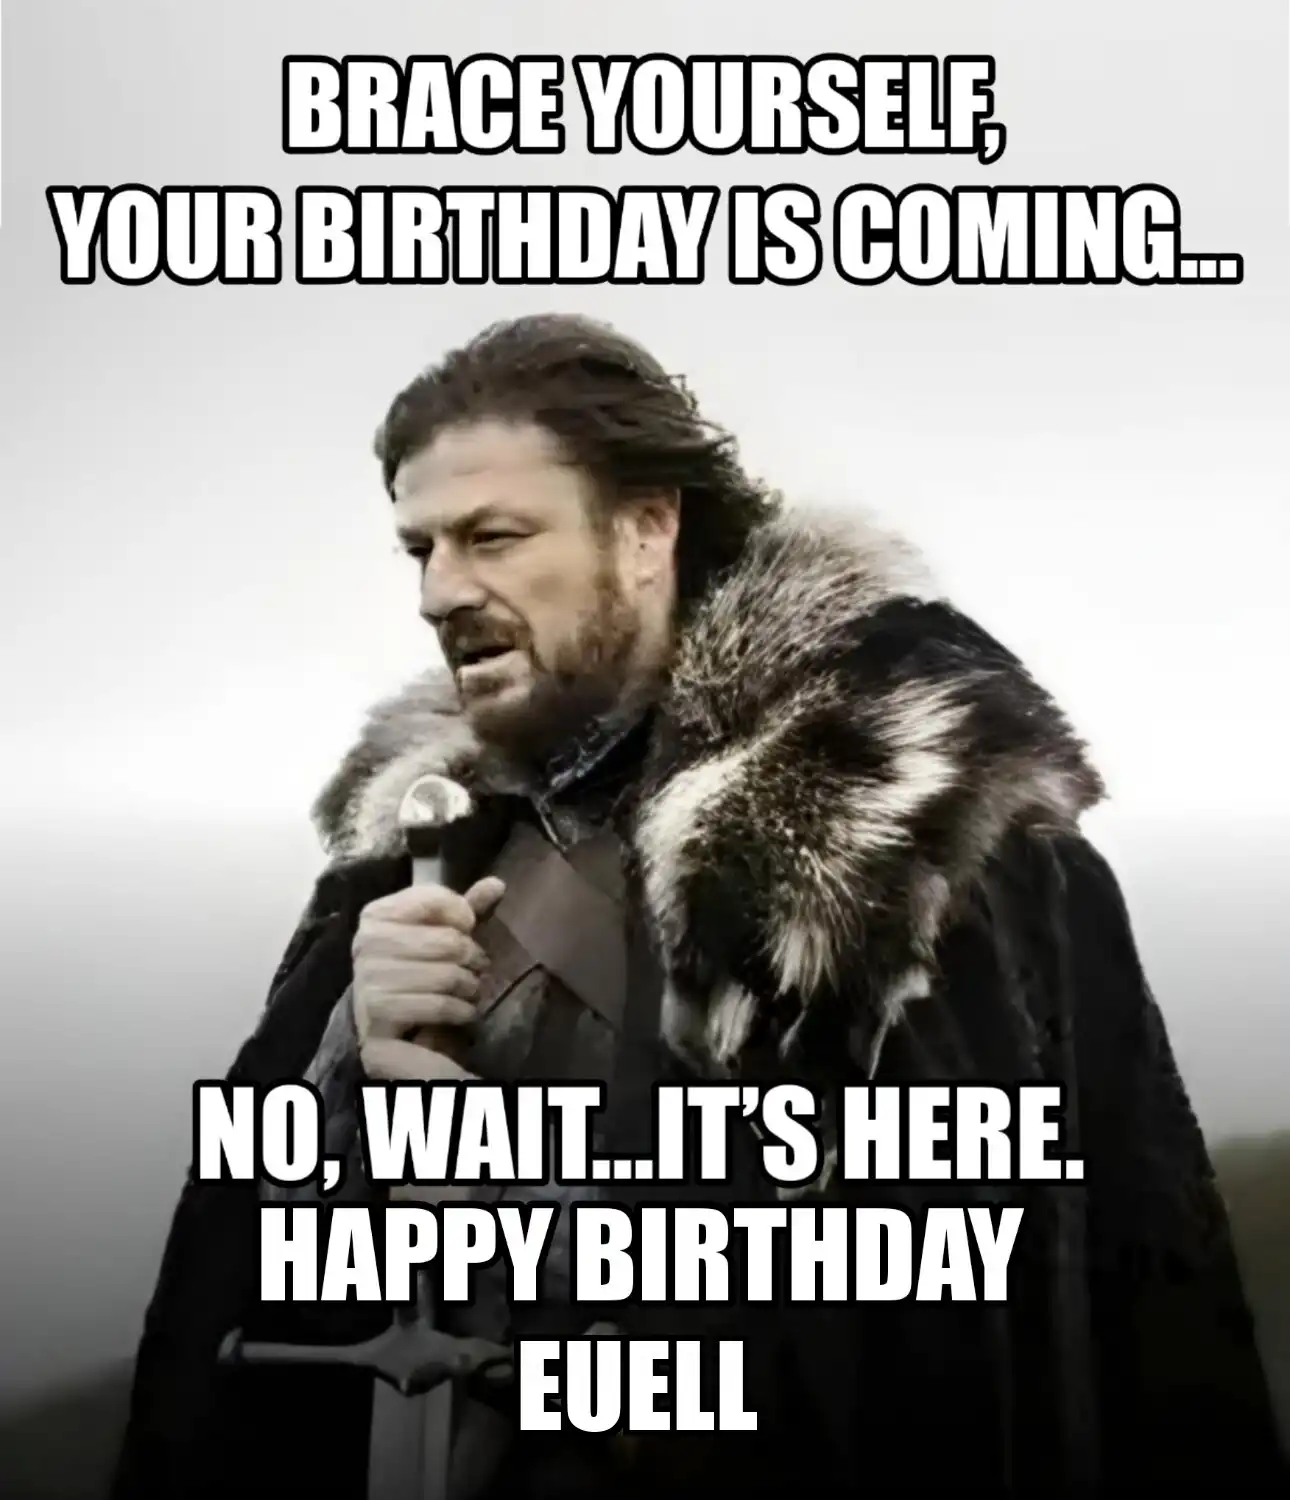 Happy Birthday Euell Brace Yourself Your Birthday Is Coming Meme